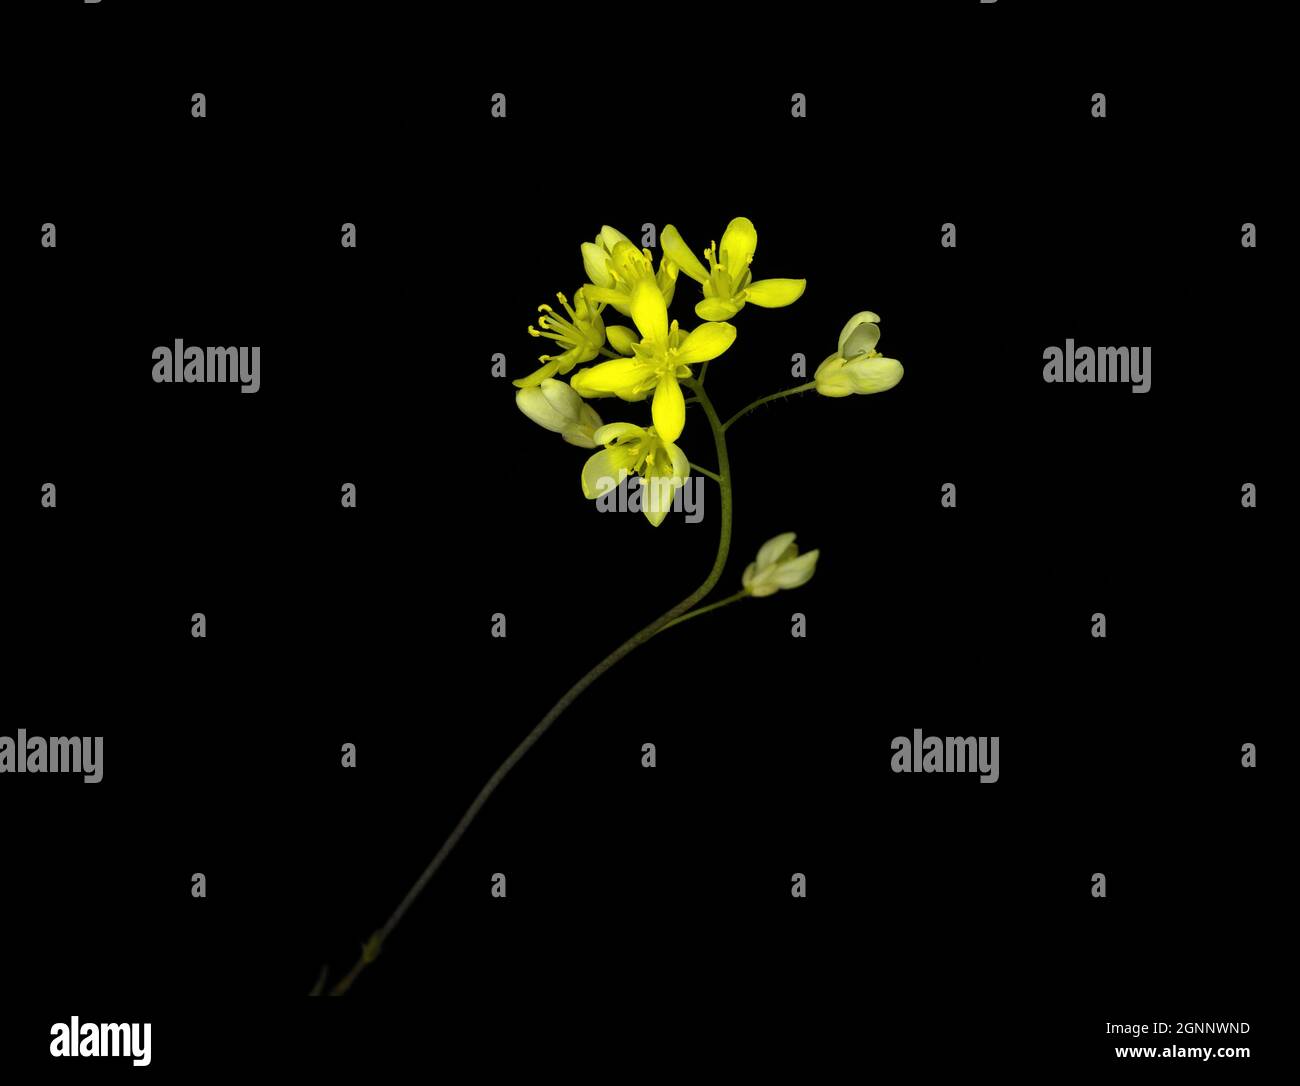 Biscutella laevigata, the buckler mustard, is a species of flowering plant in the family Brassicaceae, studio shot, black background Stock Photo